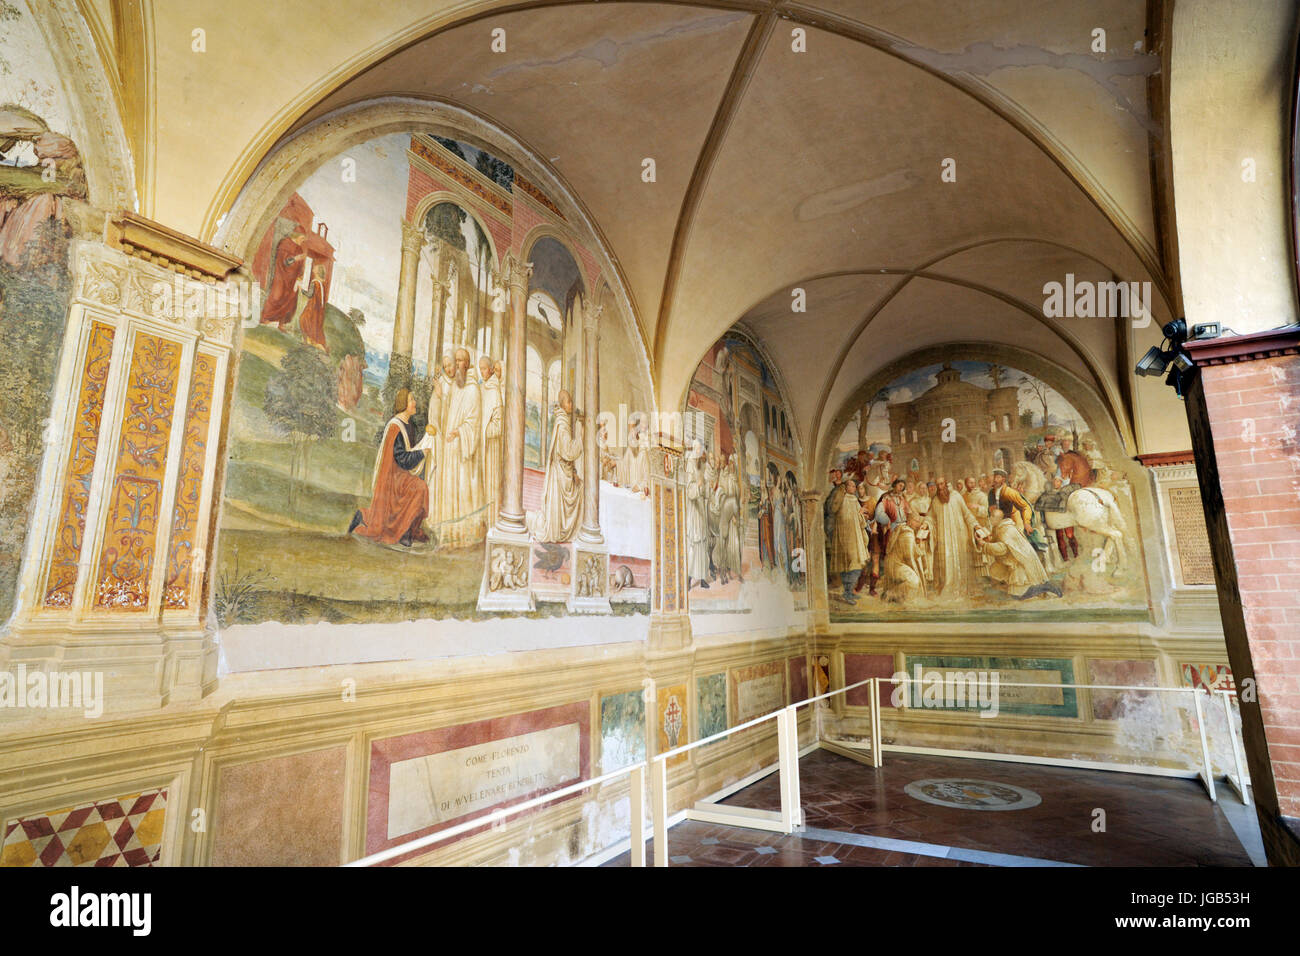 renaissance frescos, st Benedict life, paintings by Il Sodoma and Il Riccio, Great Cloister, Abbey of Monte Oliveto Maggiore, Tuscany, Italy Stock Photo